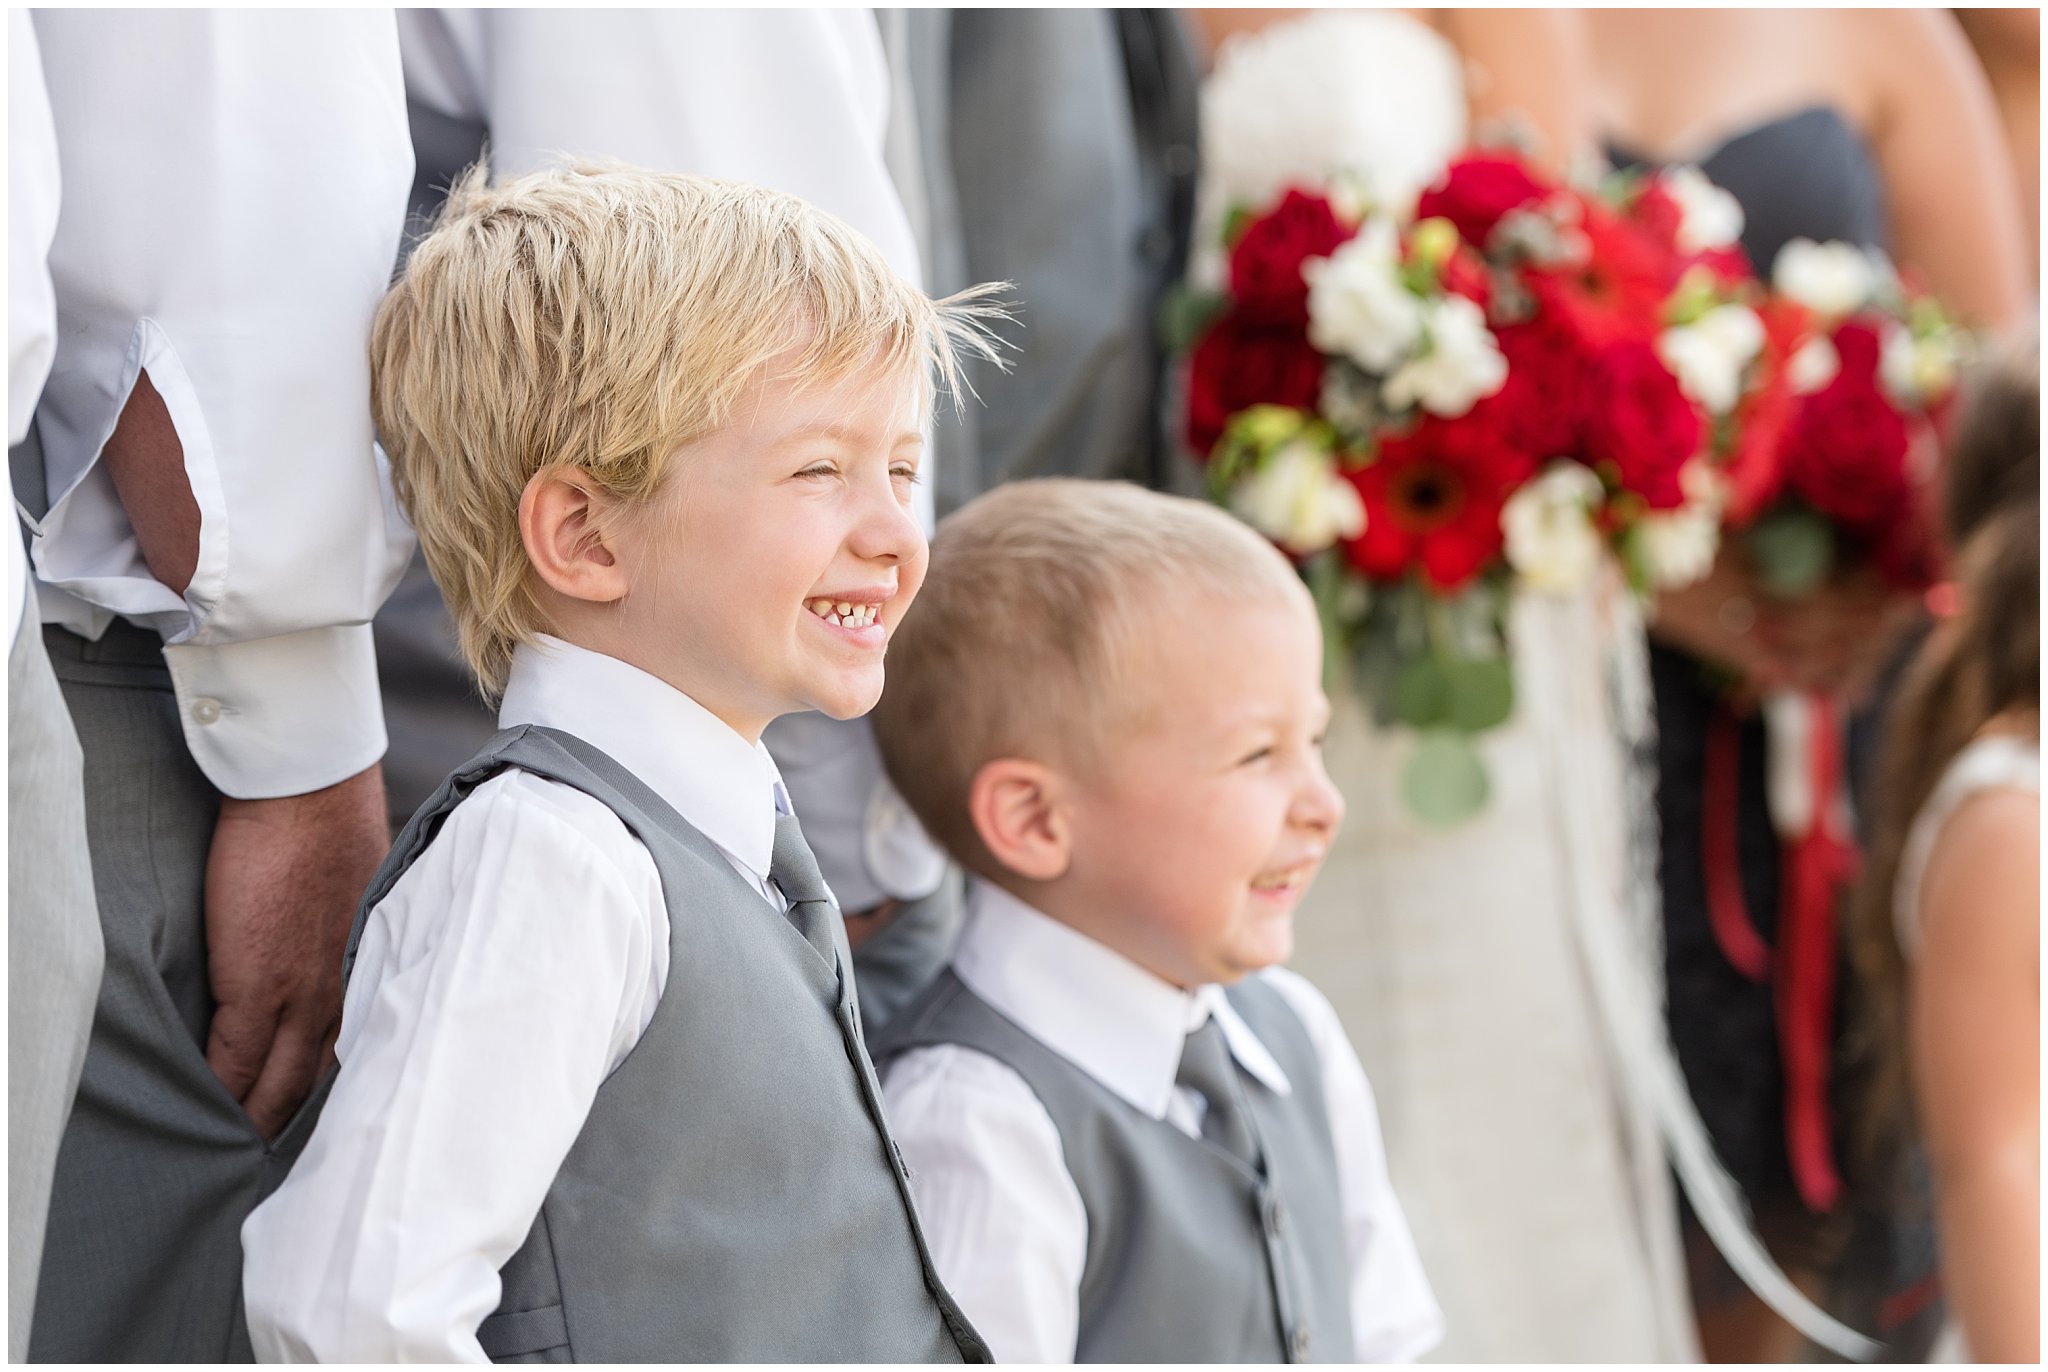 Red and white outdoor wedding ring bearers | Davis County Outdoor Wedding | Jessie and Dallin Photography